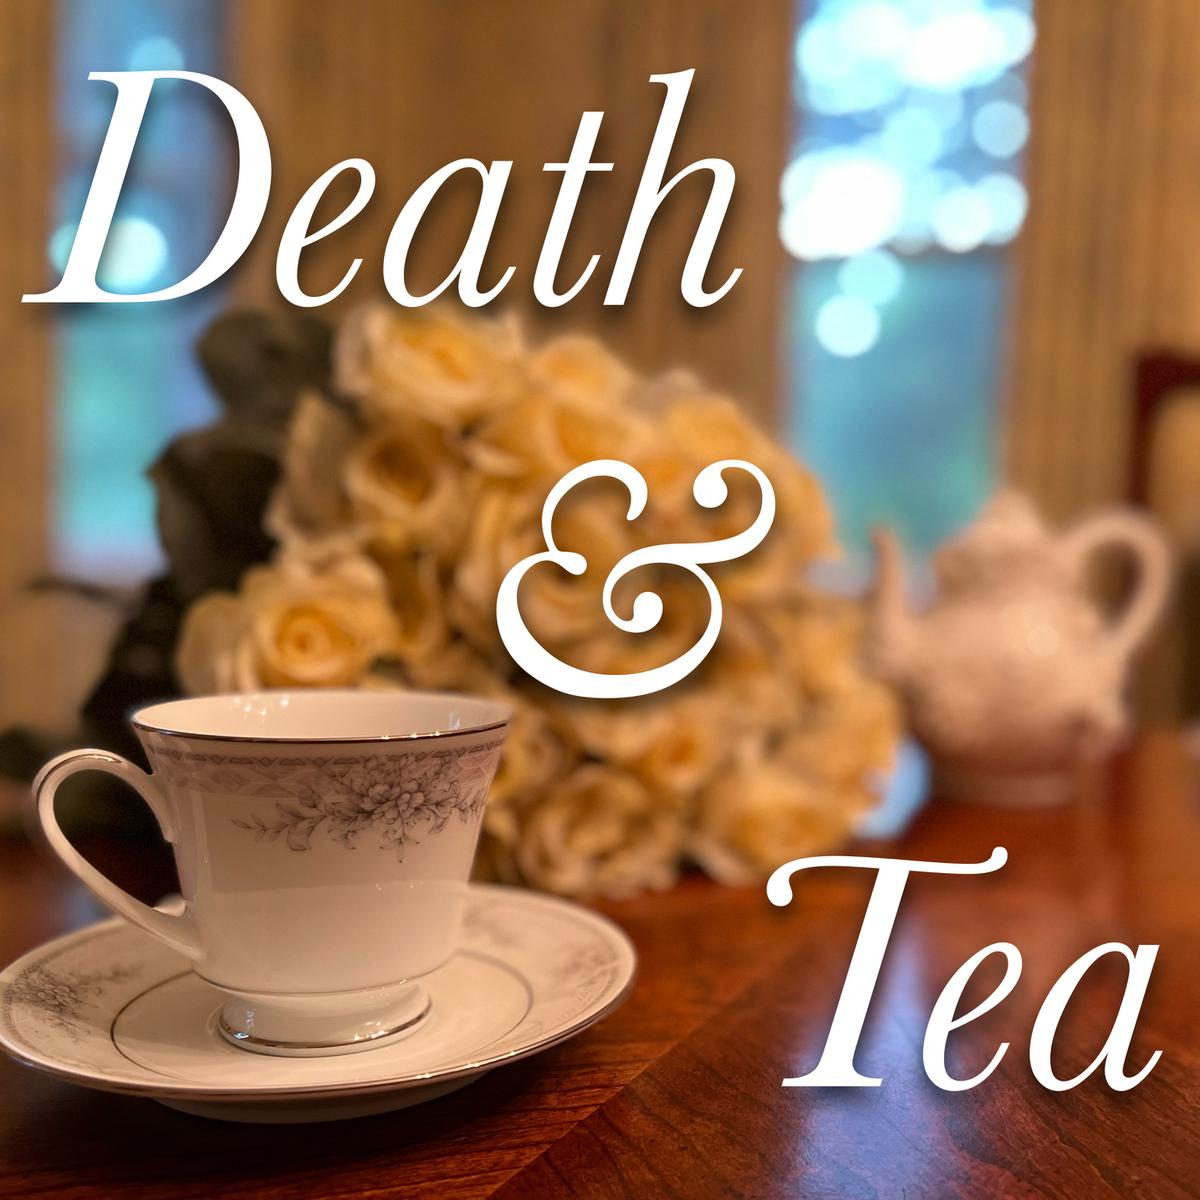 No Death Cafe in August! 